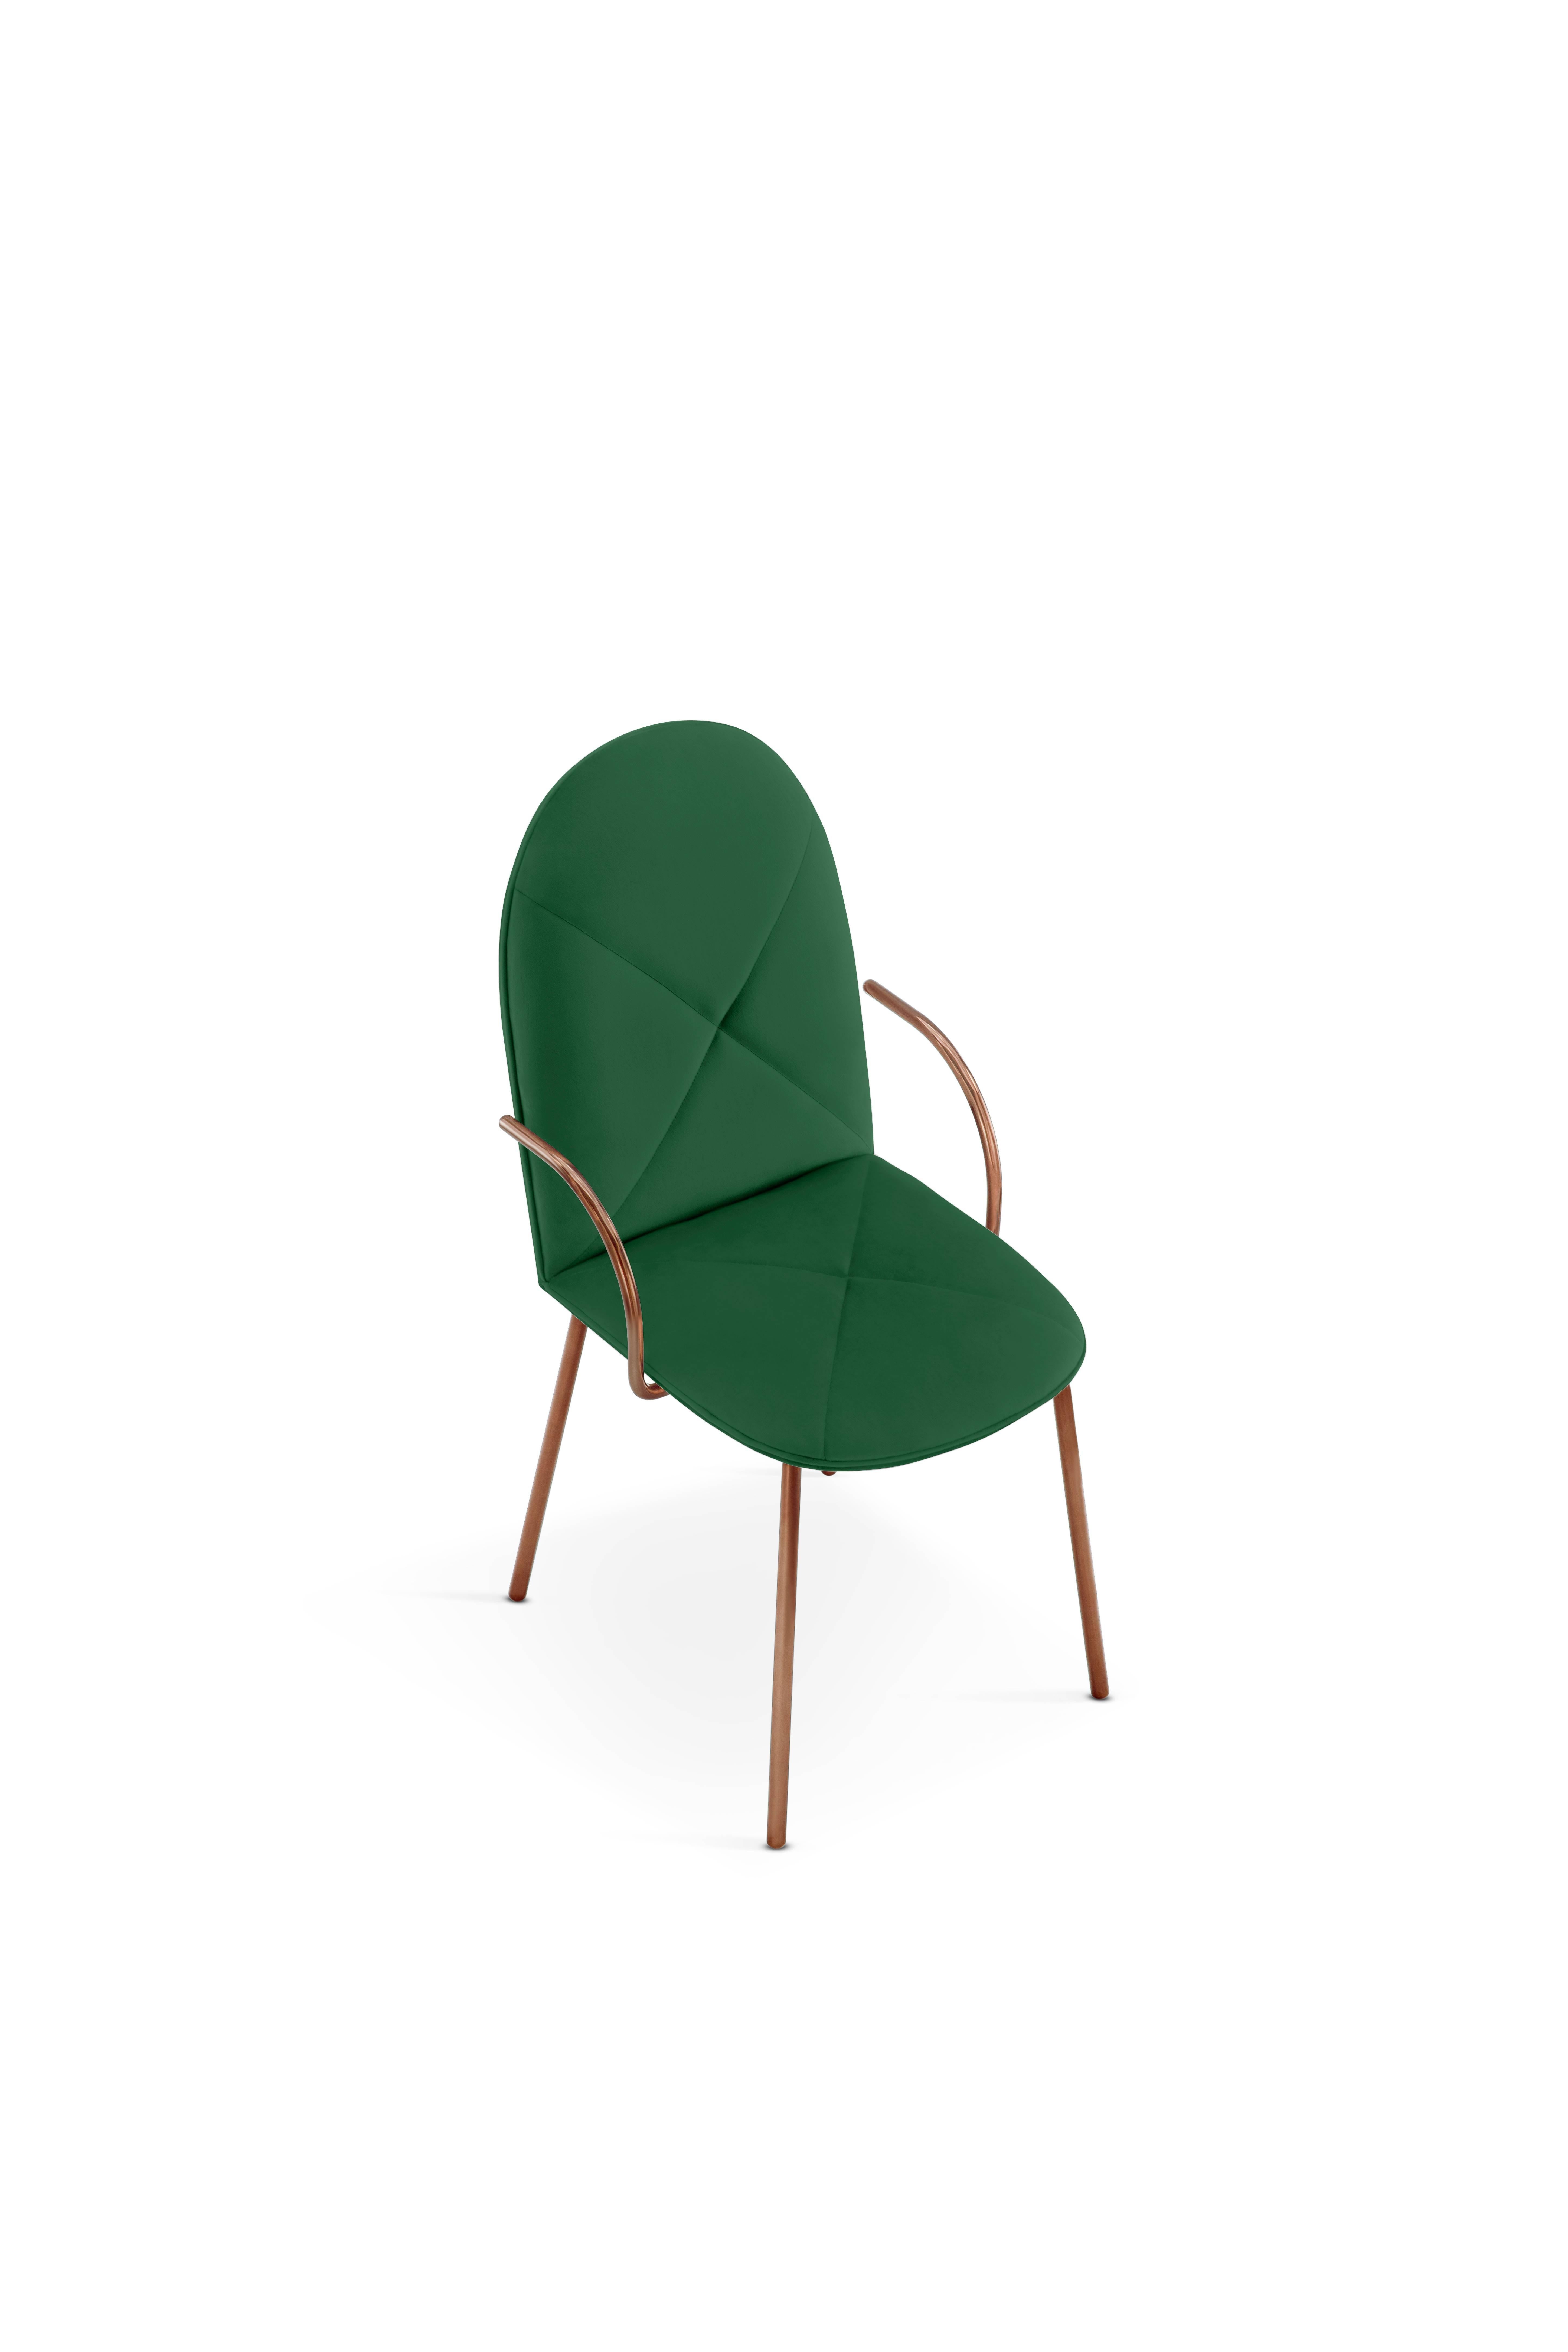 Gold Orion Chair Green by Nika Zupanc for Scarlet Splendour For Sale